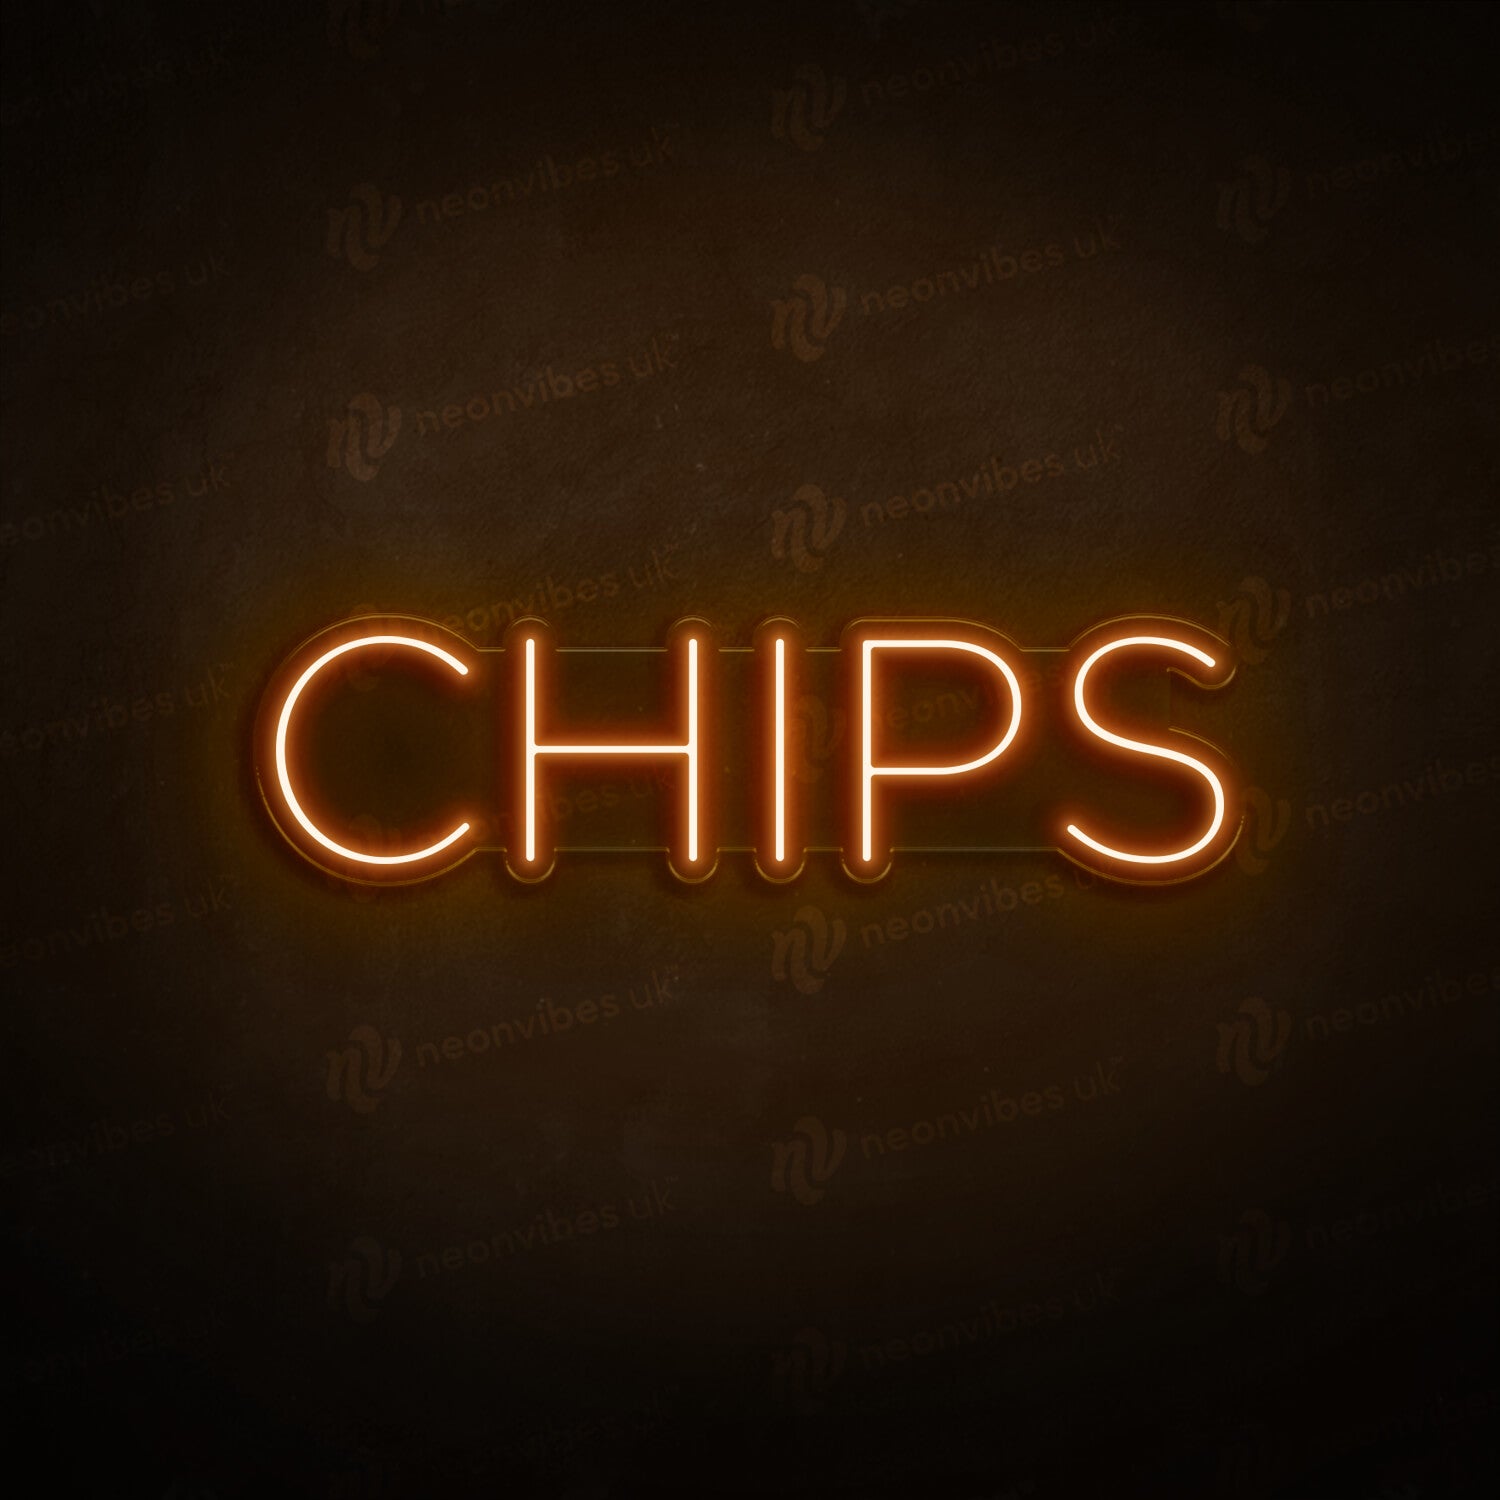 Chips neon sign